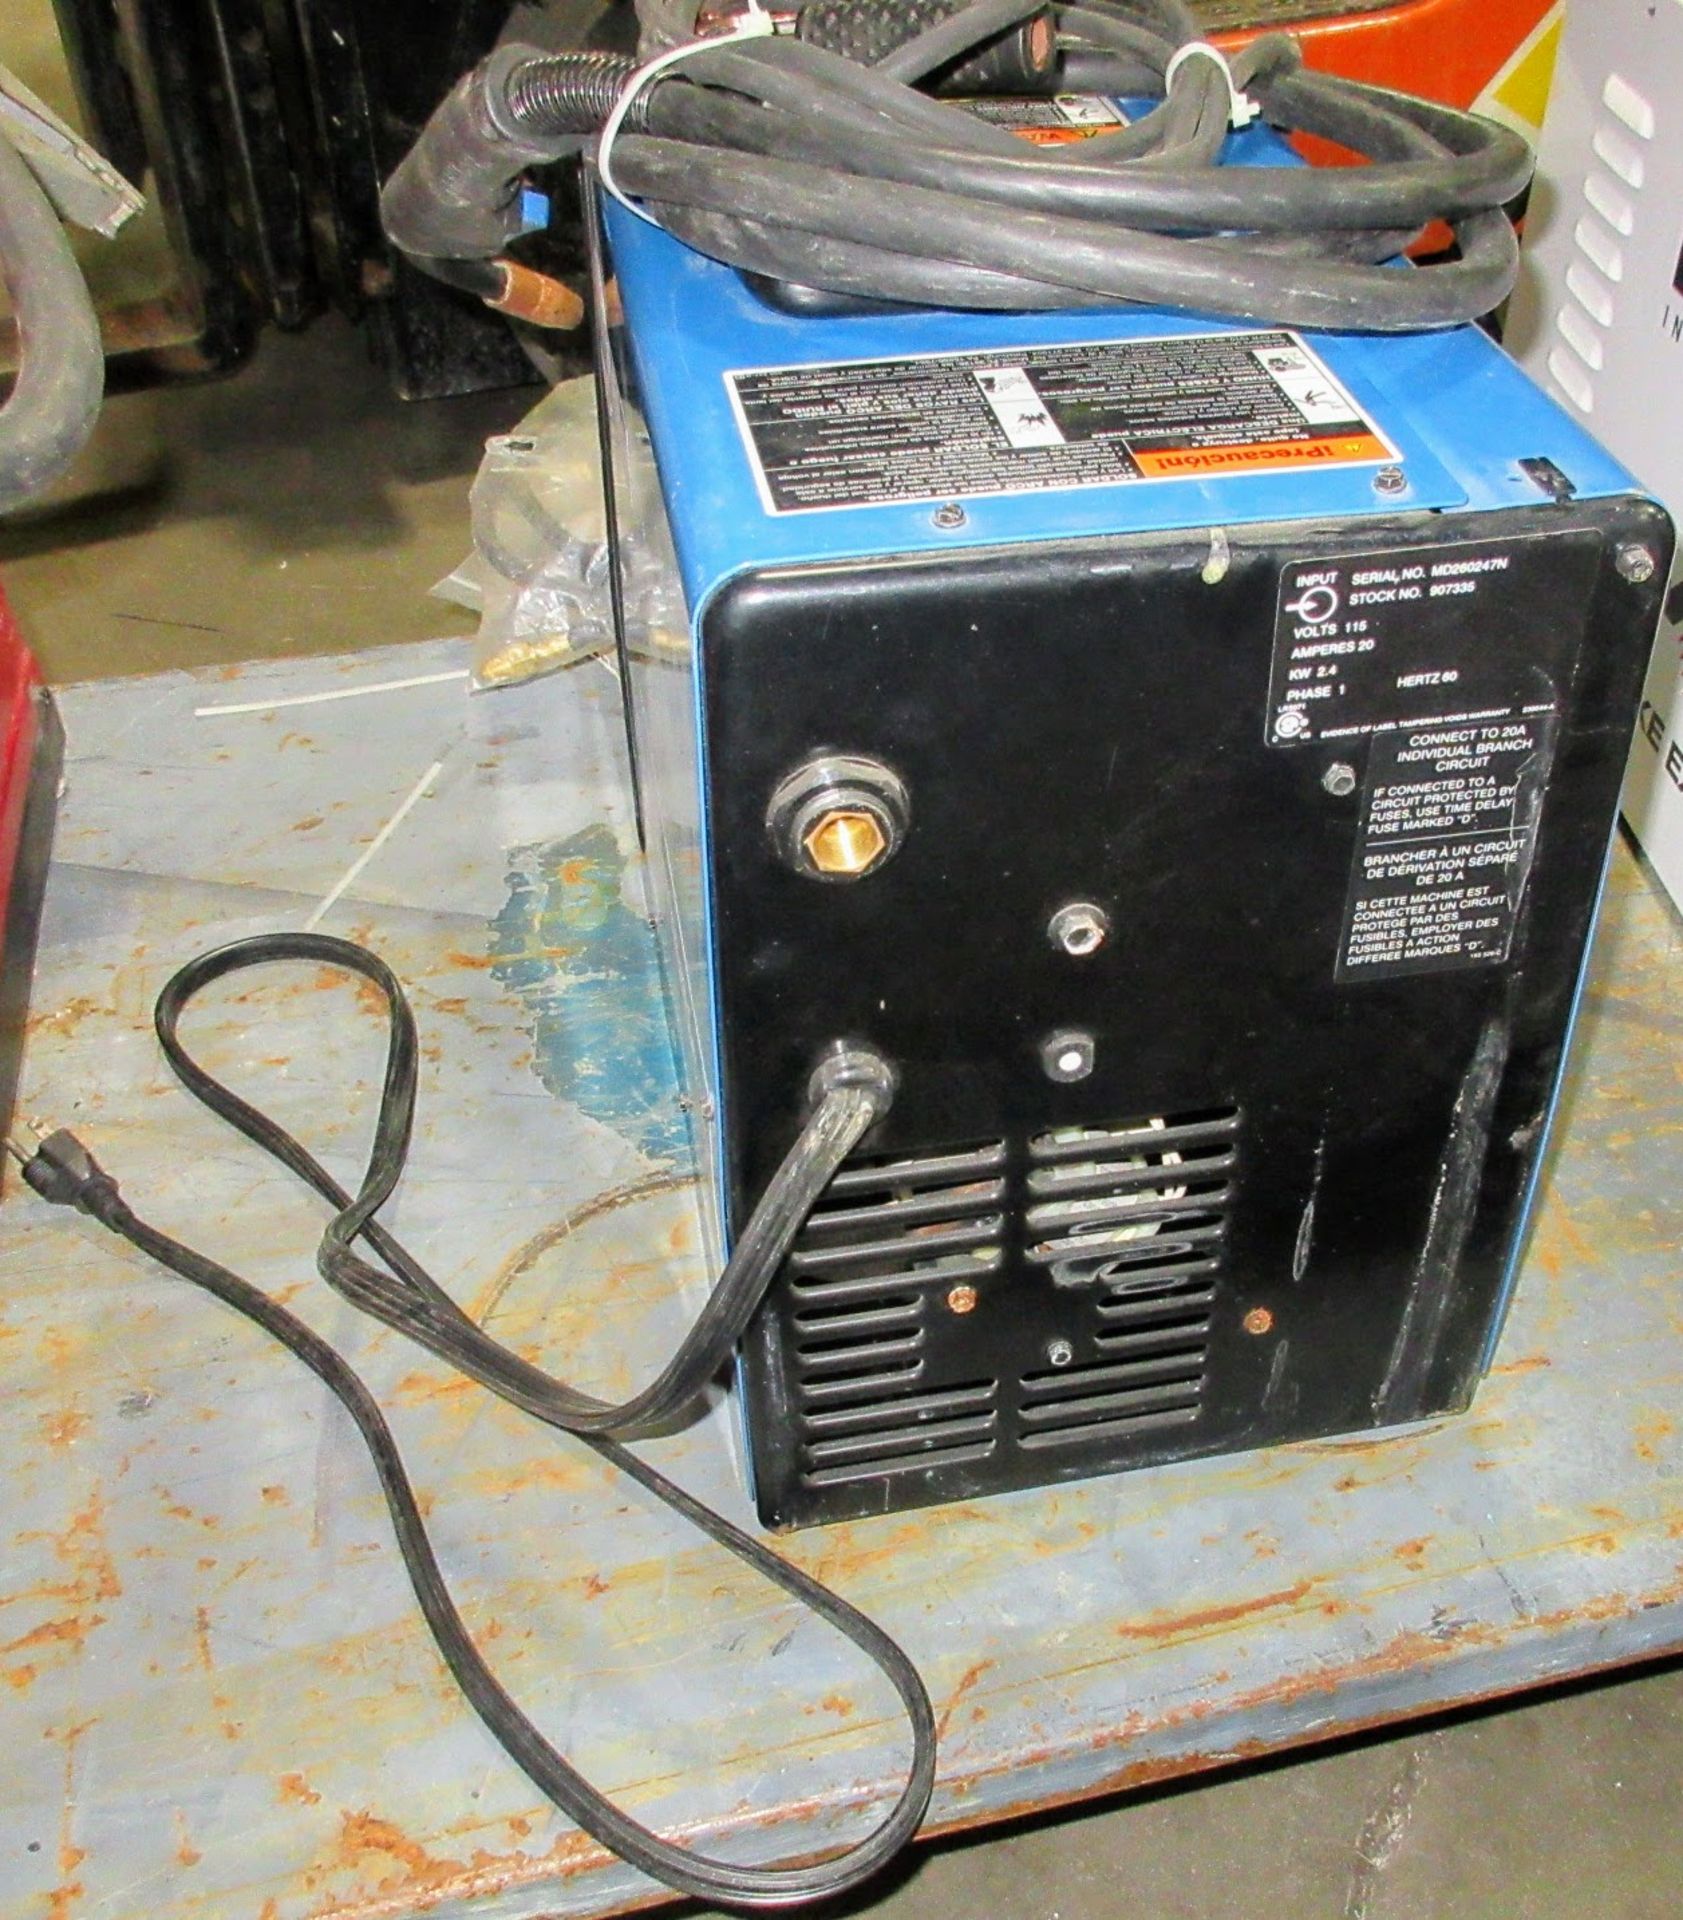 MILLER MILLERMATIC 140 AUTO-SET 120V WIRE WELDER W/ CABLES AND WELDING WIRE KIT, S/N MP260247N - Image 4 of 4